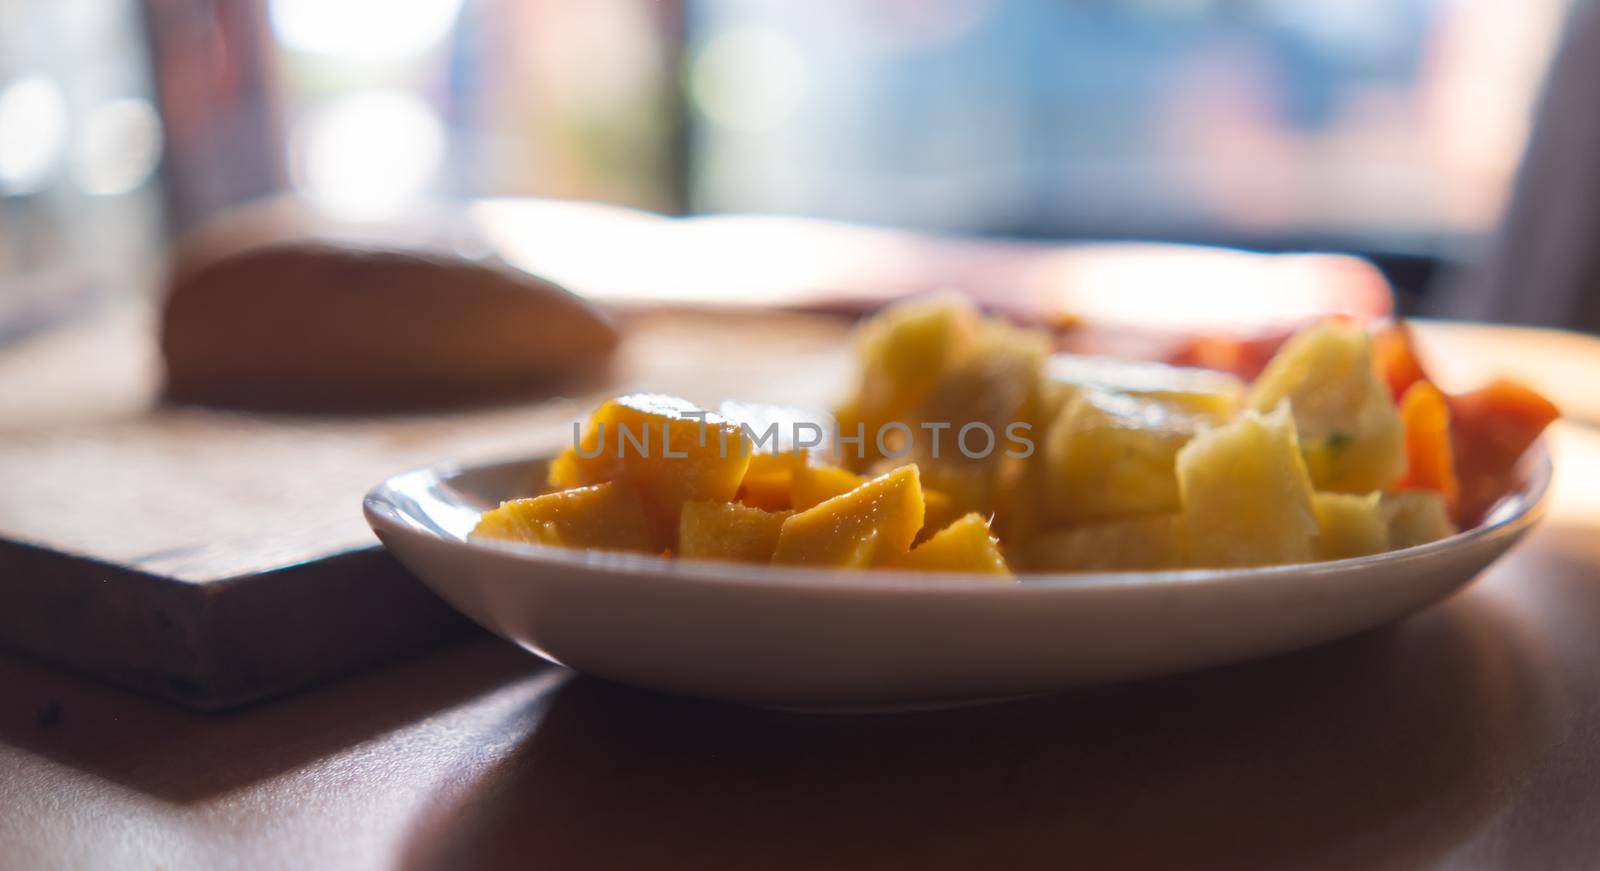 Plate of sliced fruit on table with blurry and bright background by Kanelbulle